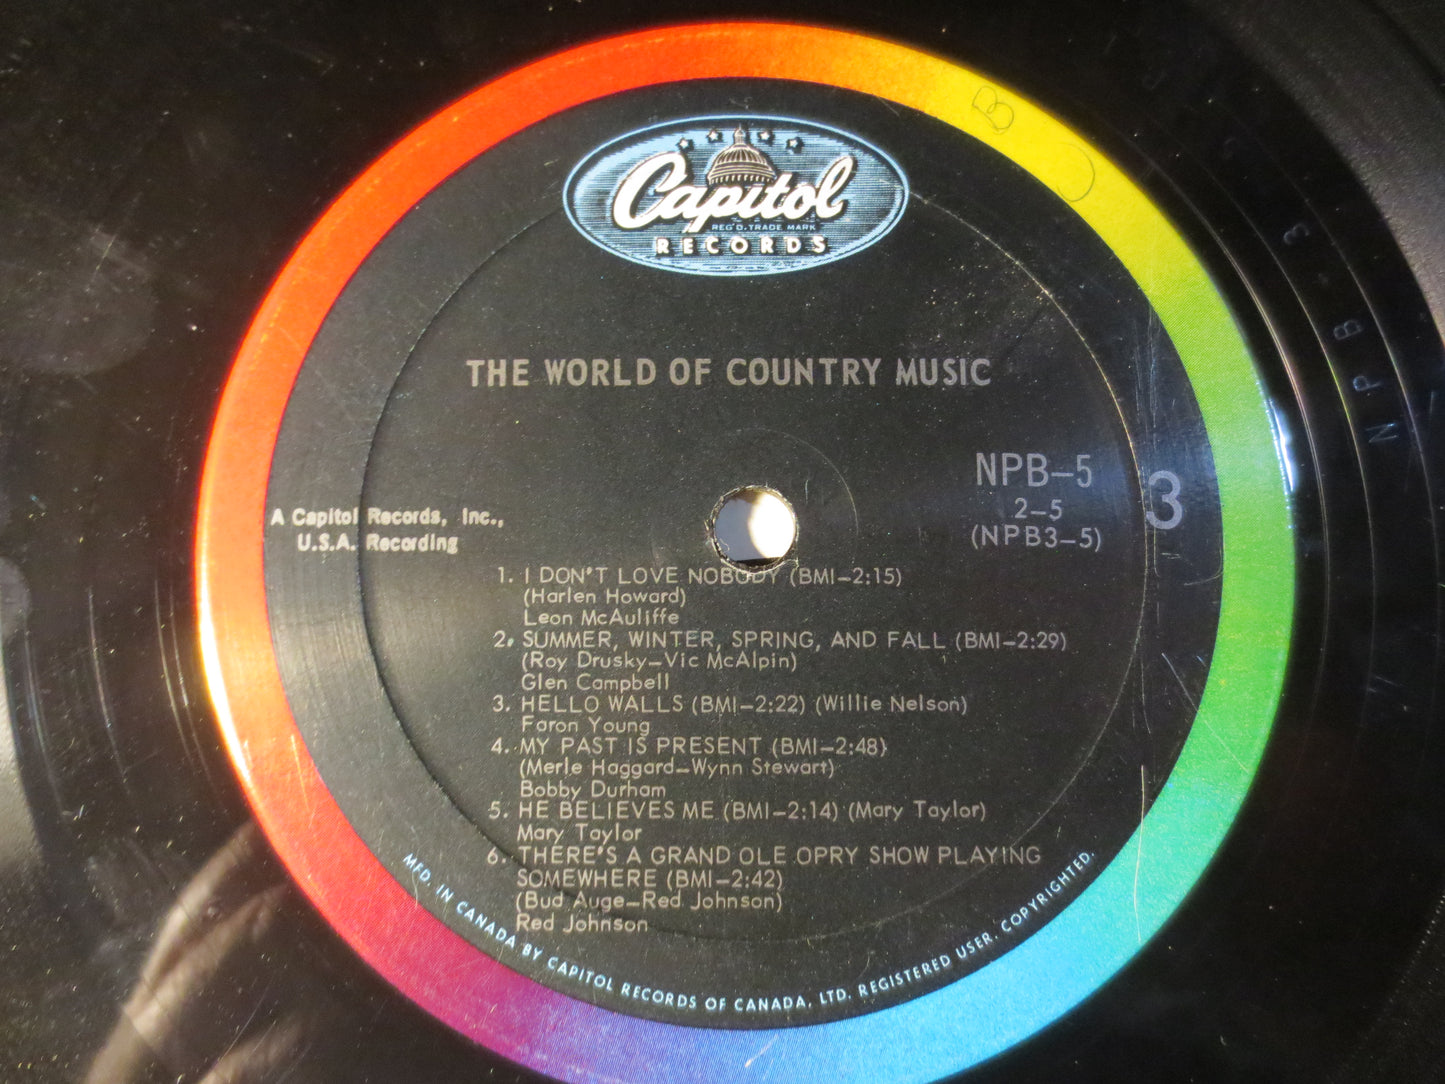 The WORLD of COUNTRY MUSIC, Double Record, Country Record, Vintage Vinyl, Record Vinyl, Records, Vinyl Record, 1965 Records